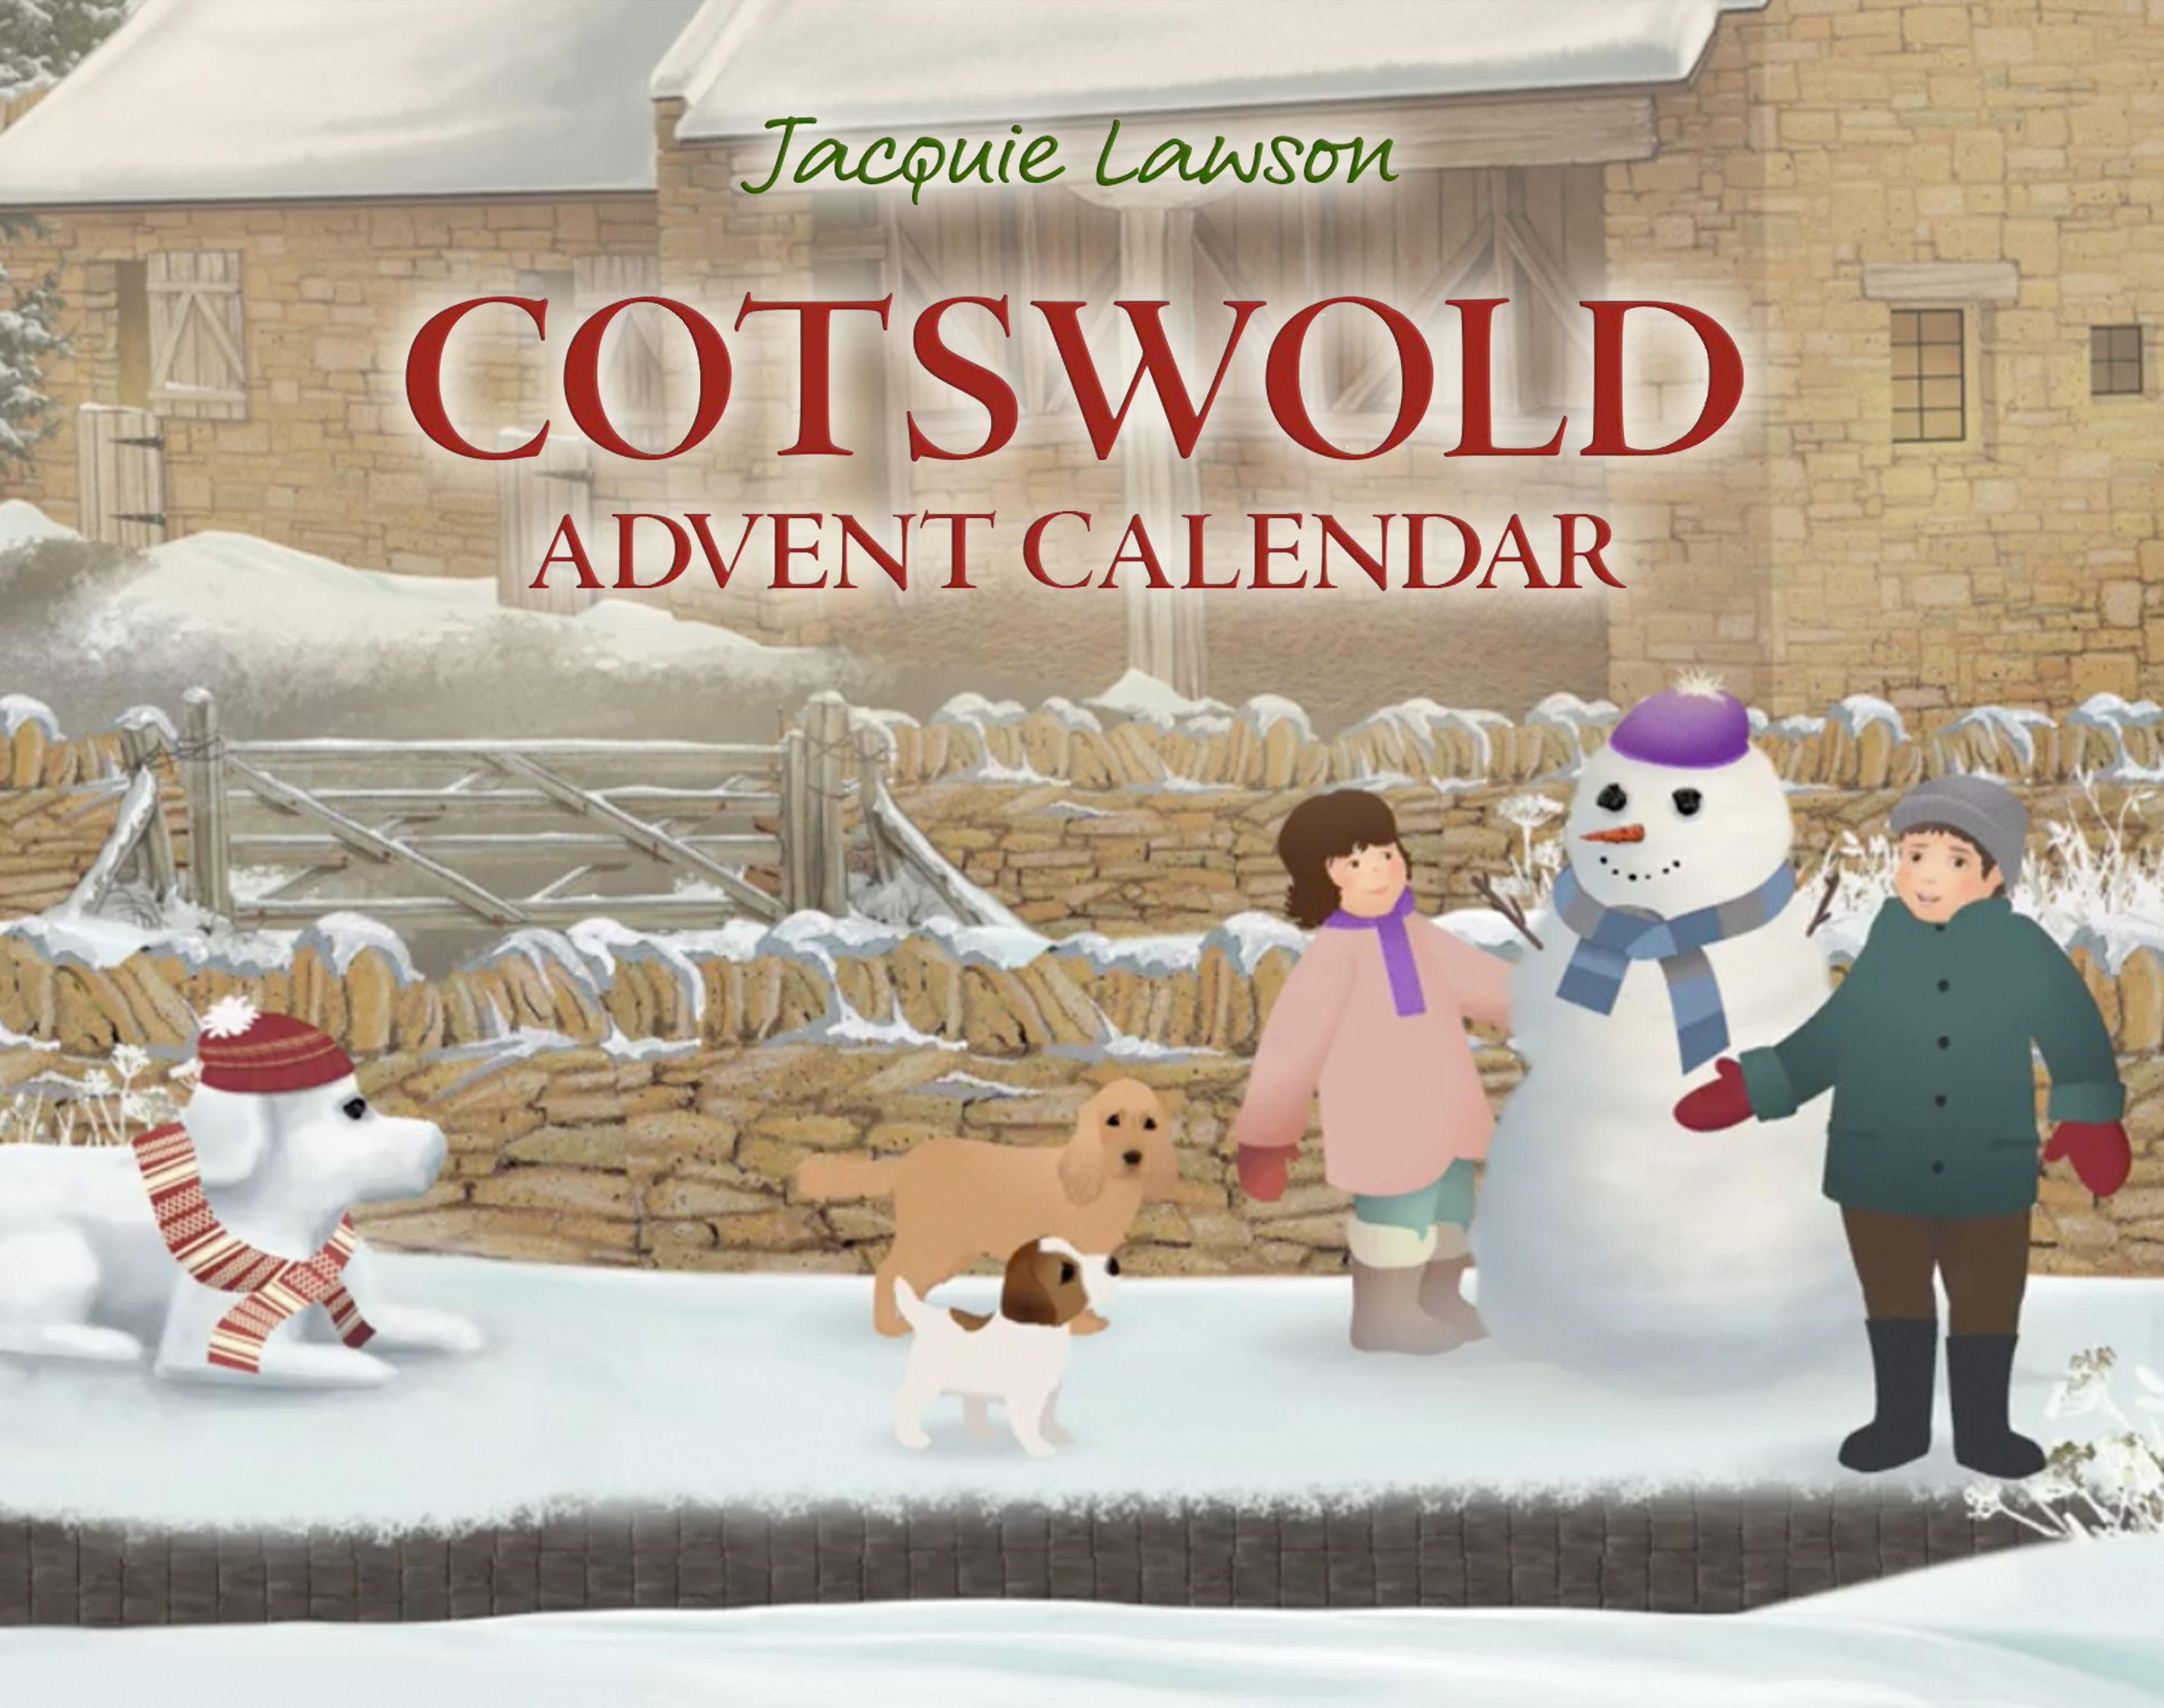 New Jacquie Lawson Cotswold Advent Calendar Released For